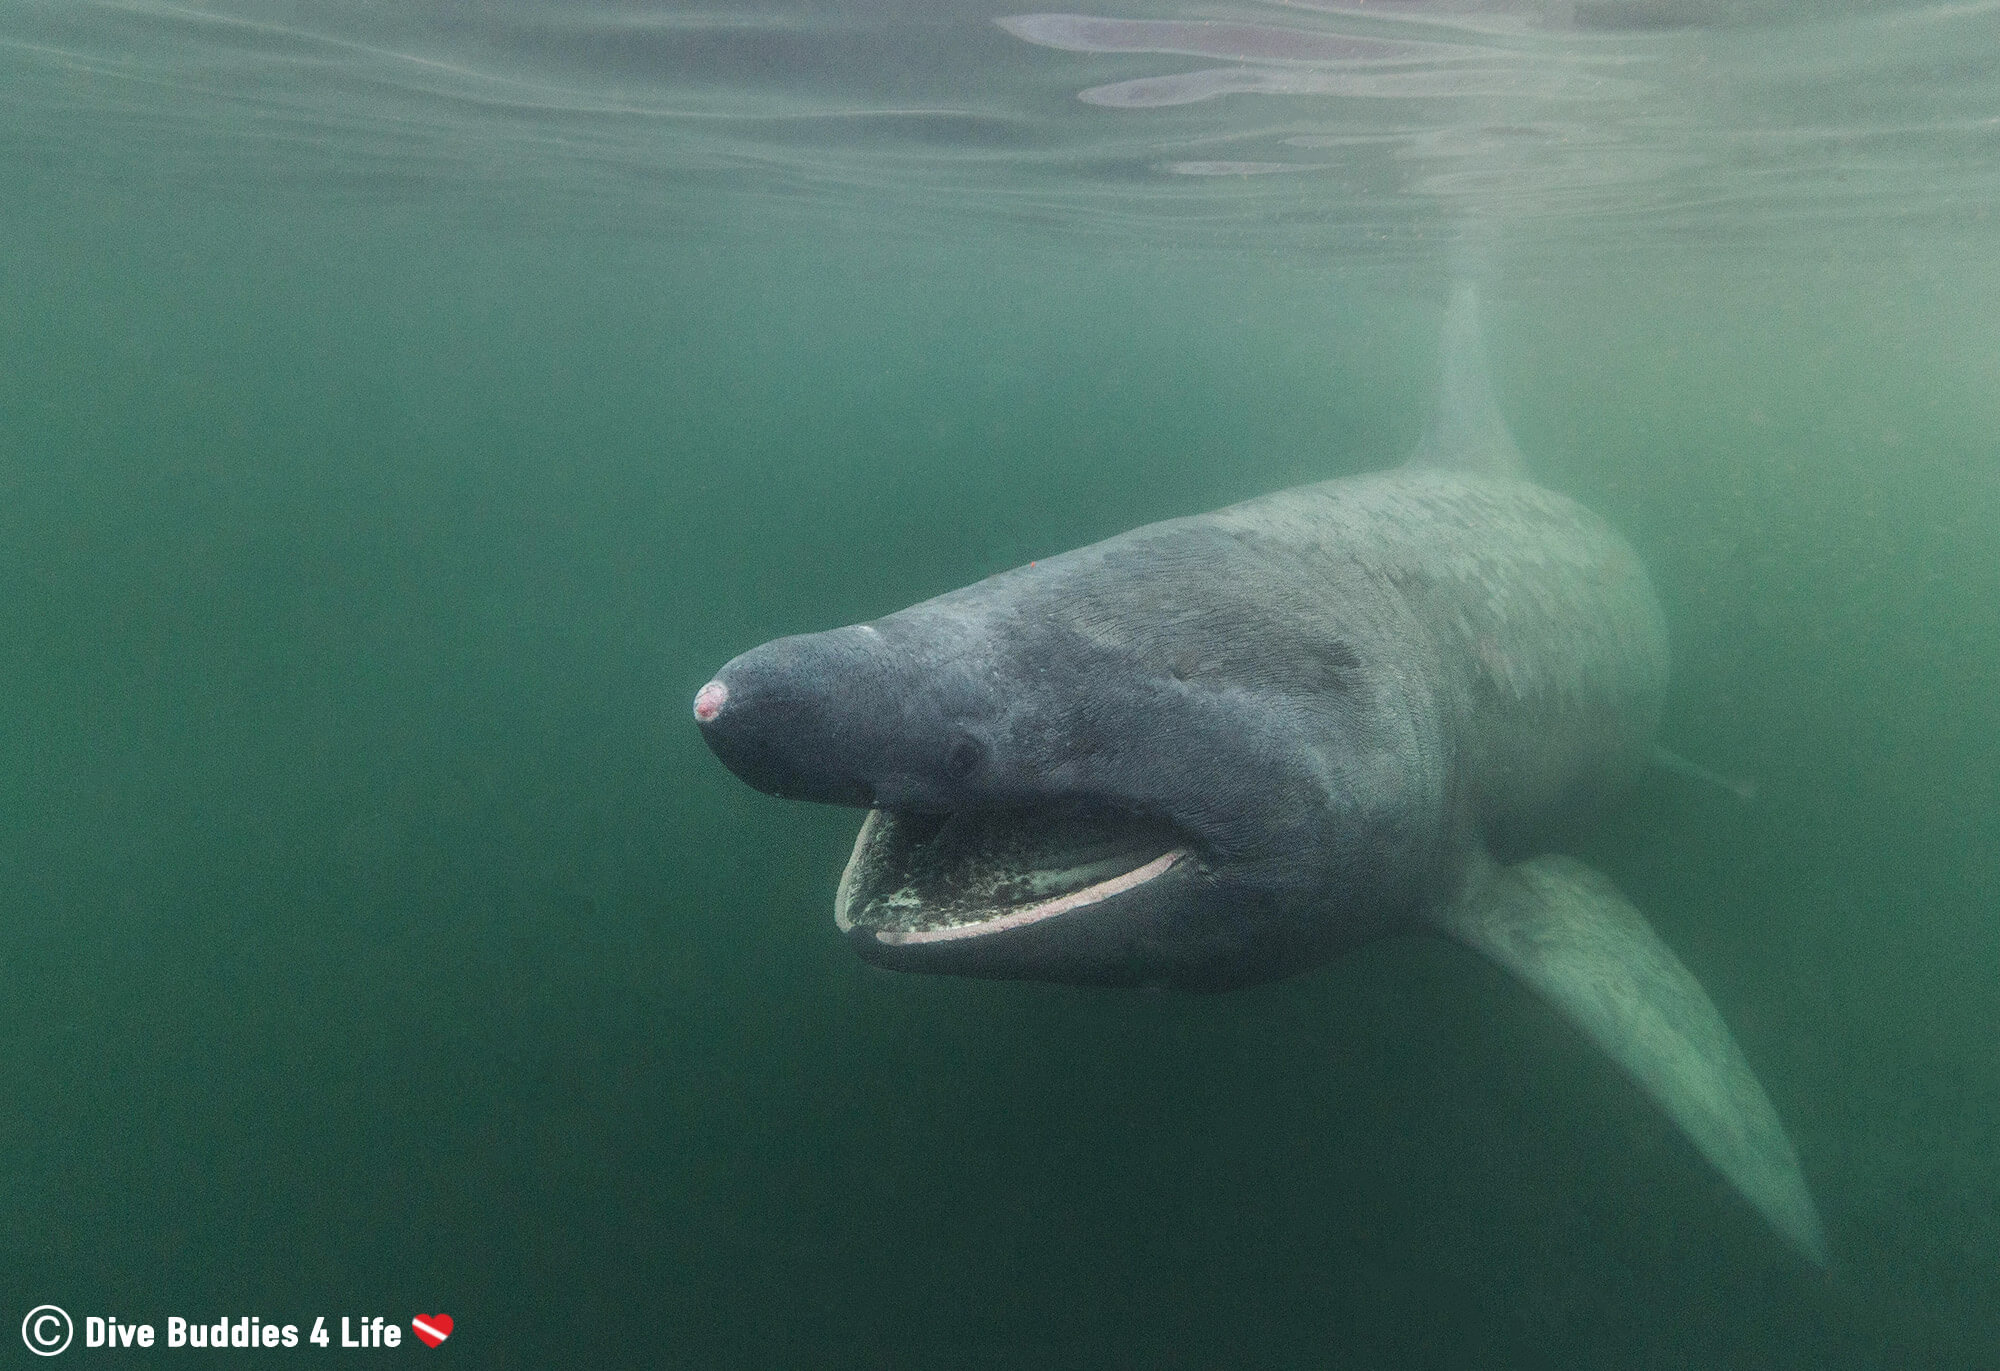 Rudolph the Basking Shark from Our Research Expedition in Northern Scotland, UK